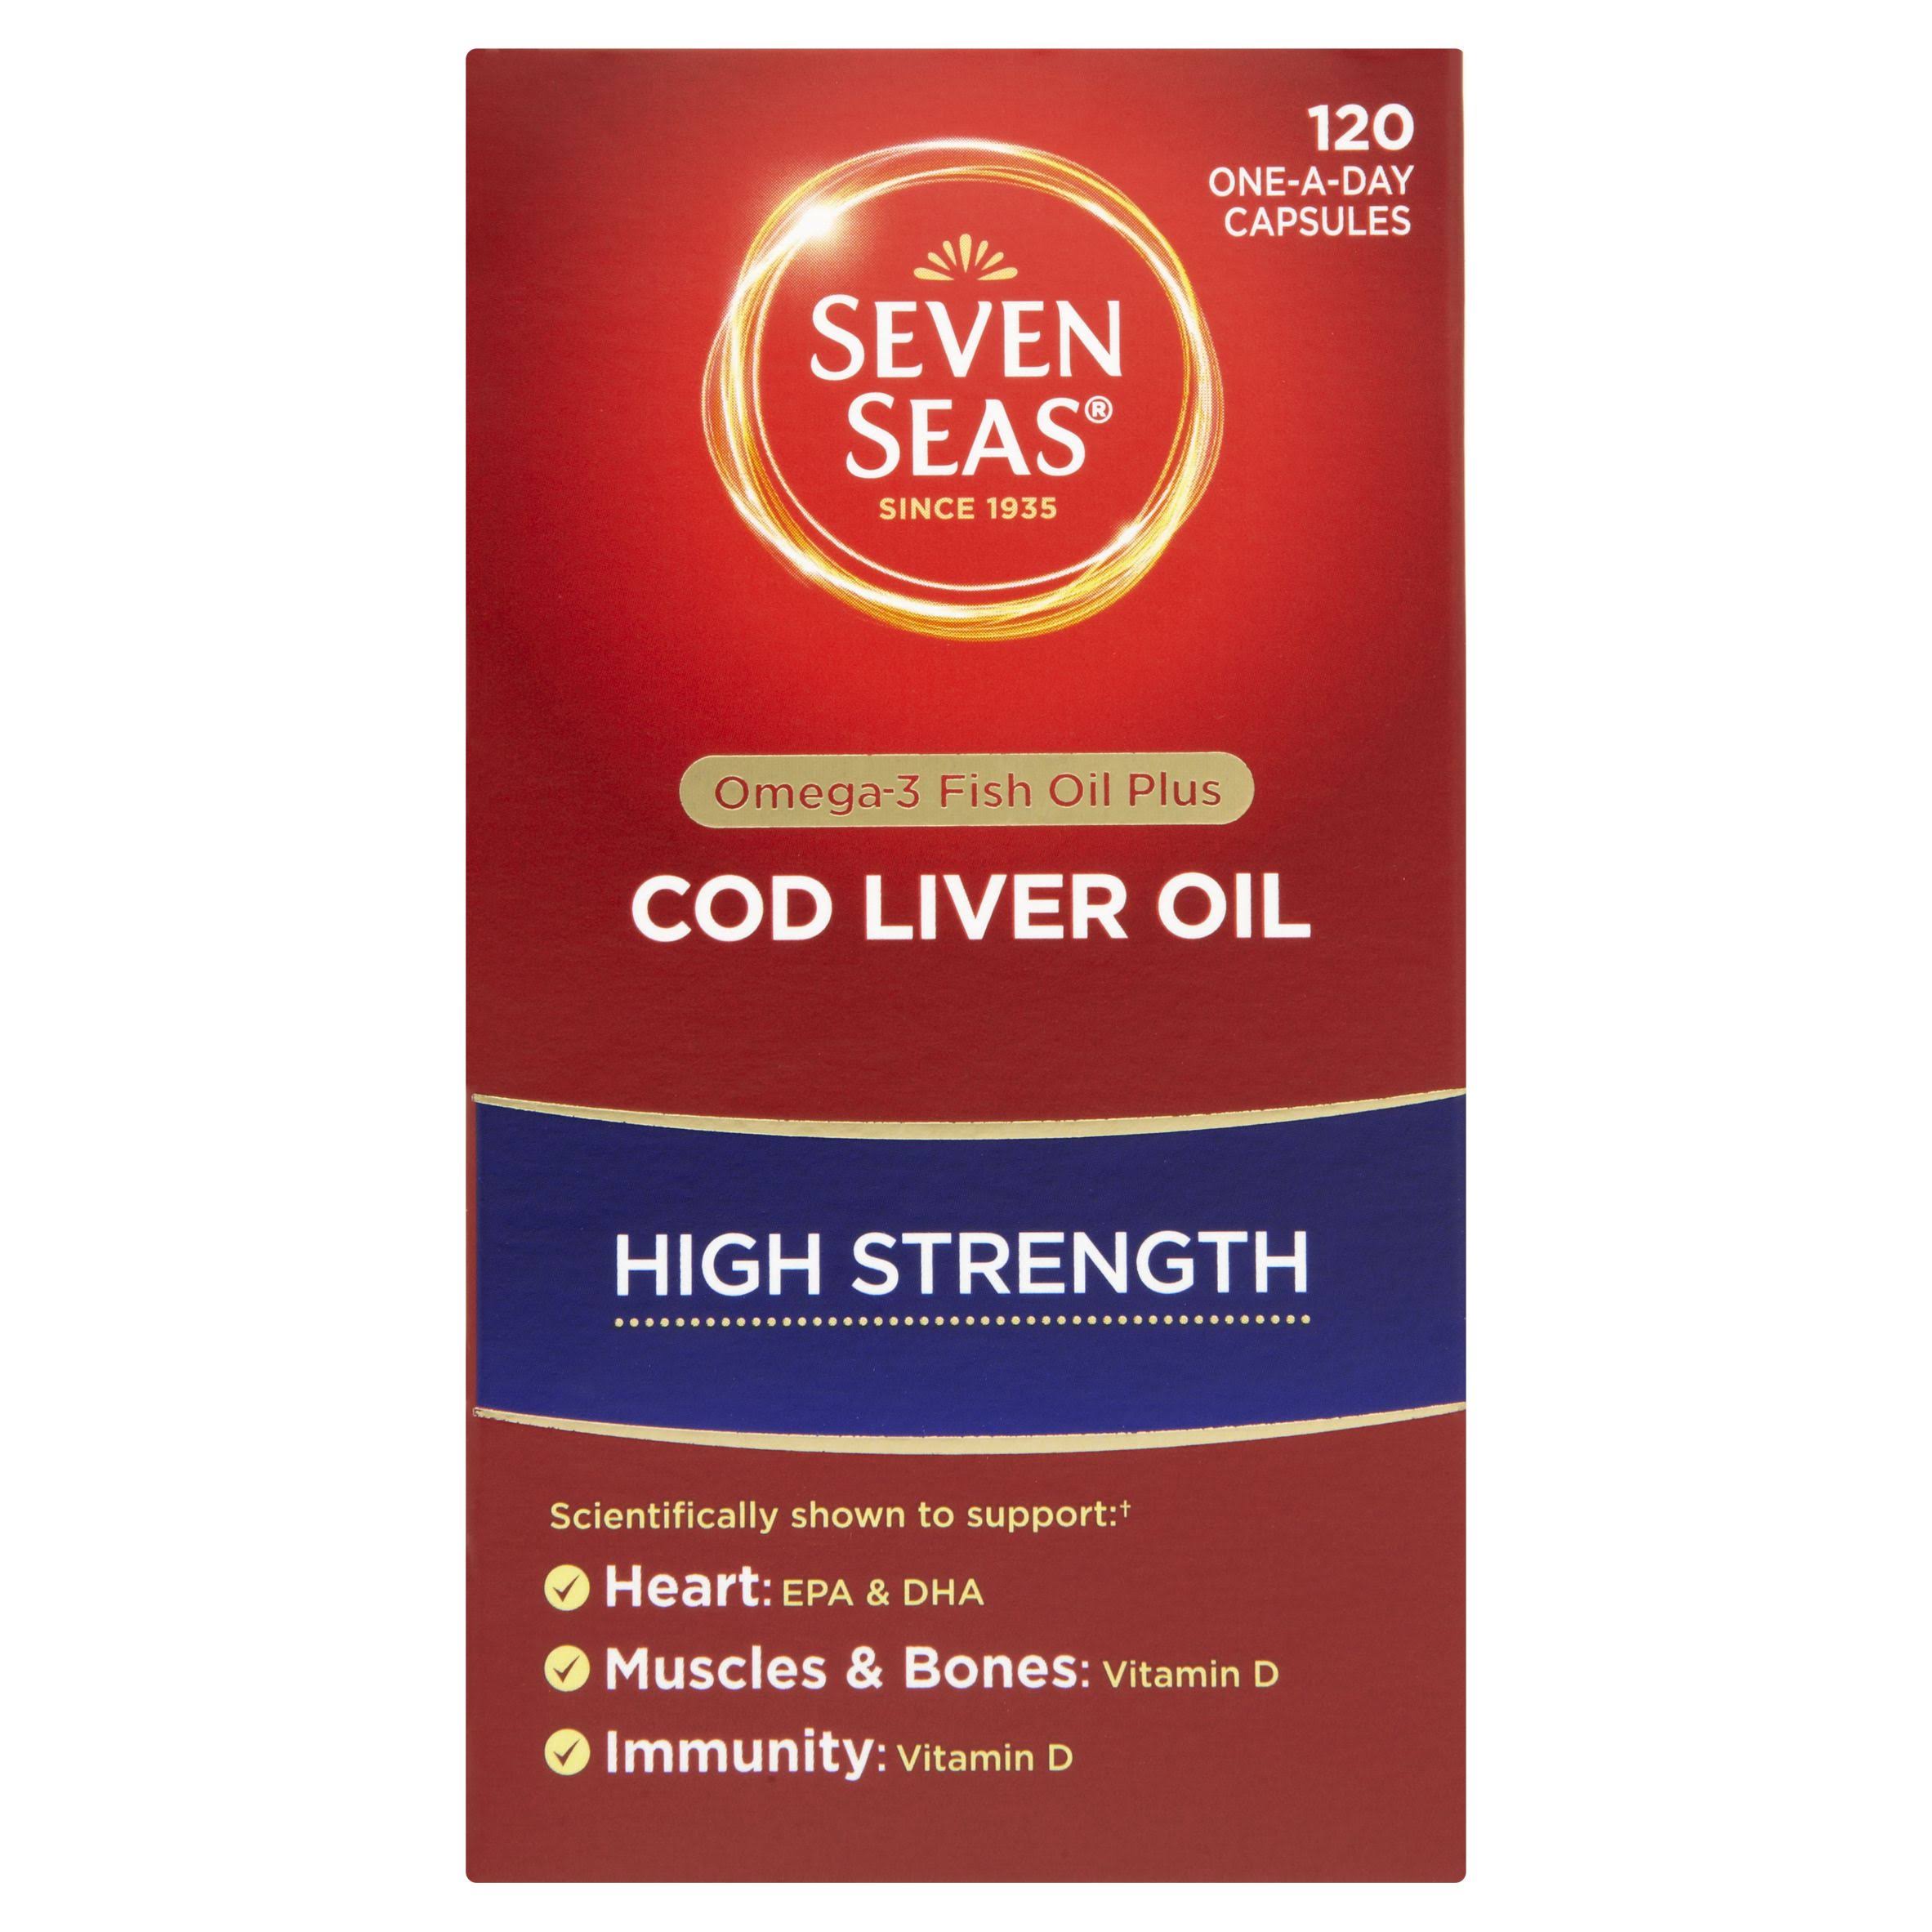 Seven Seas High Strength Pure Cod Liver Oil Supplement - 120 Capsules